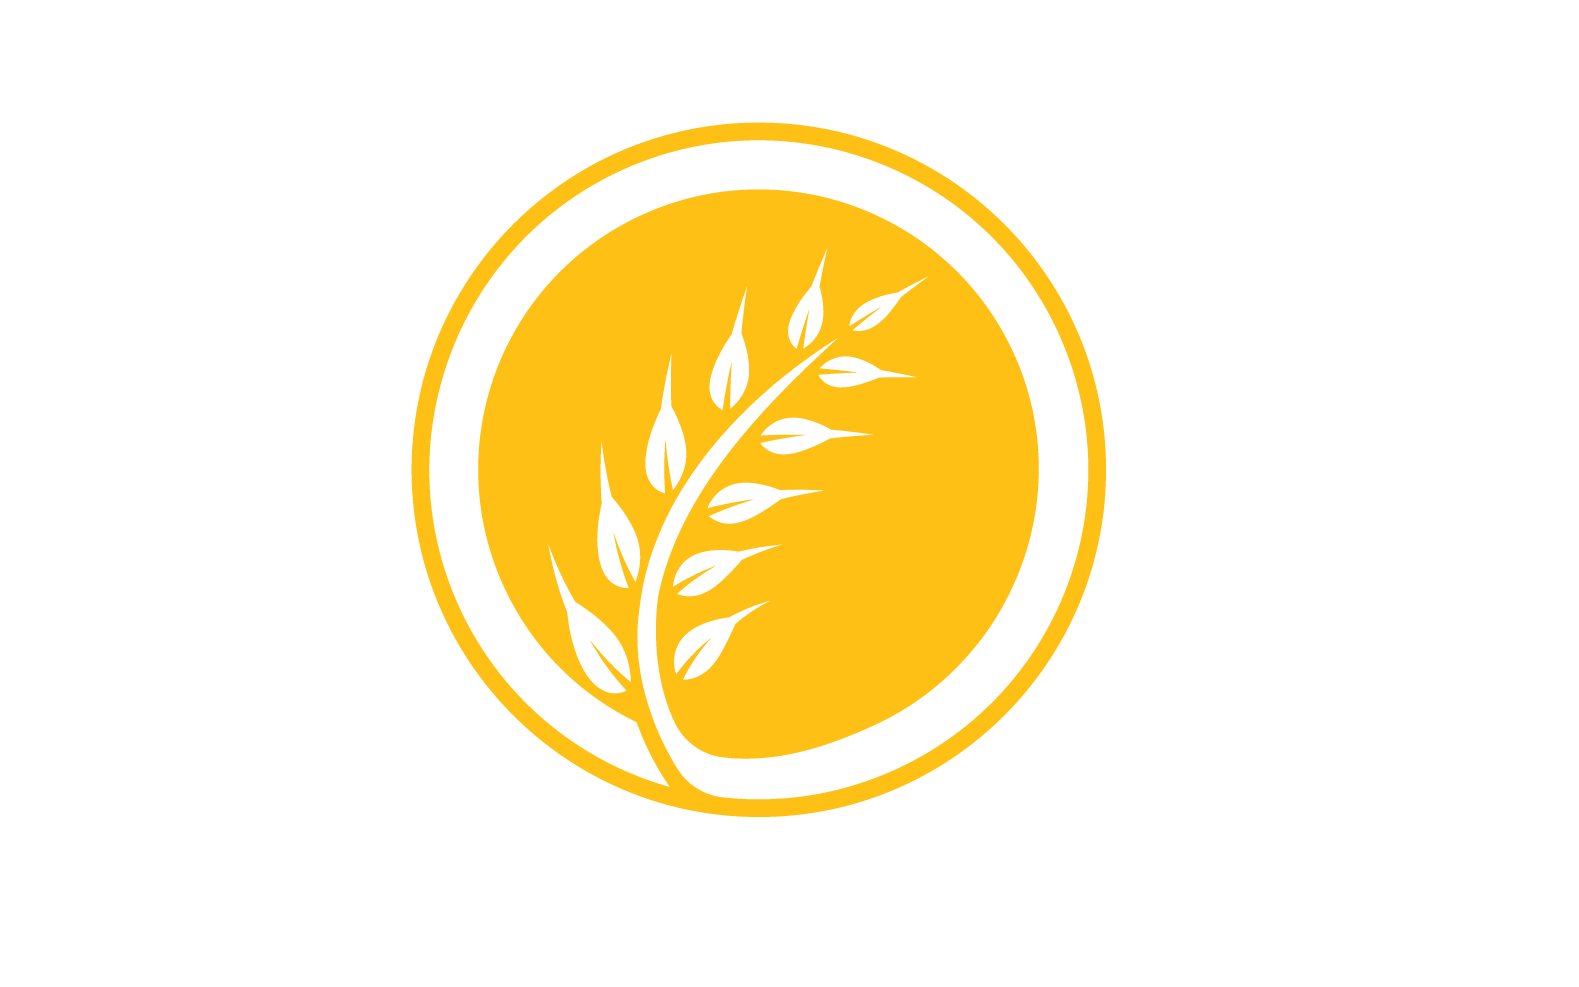 Agriculture wheat rice food logo v12